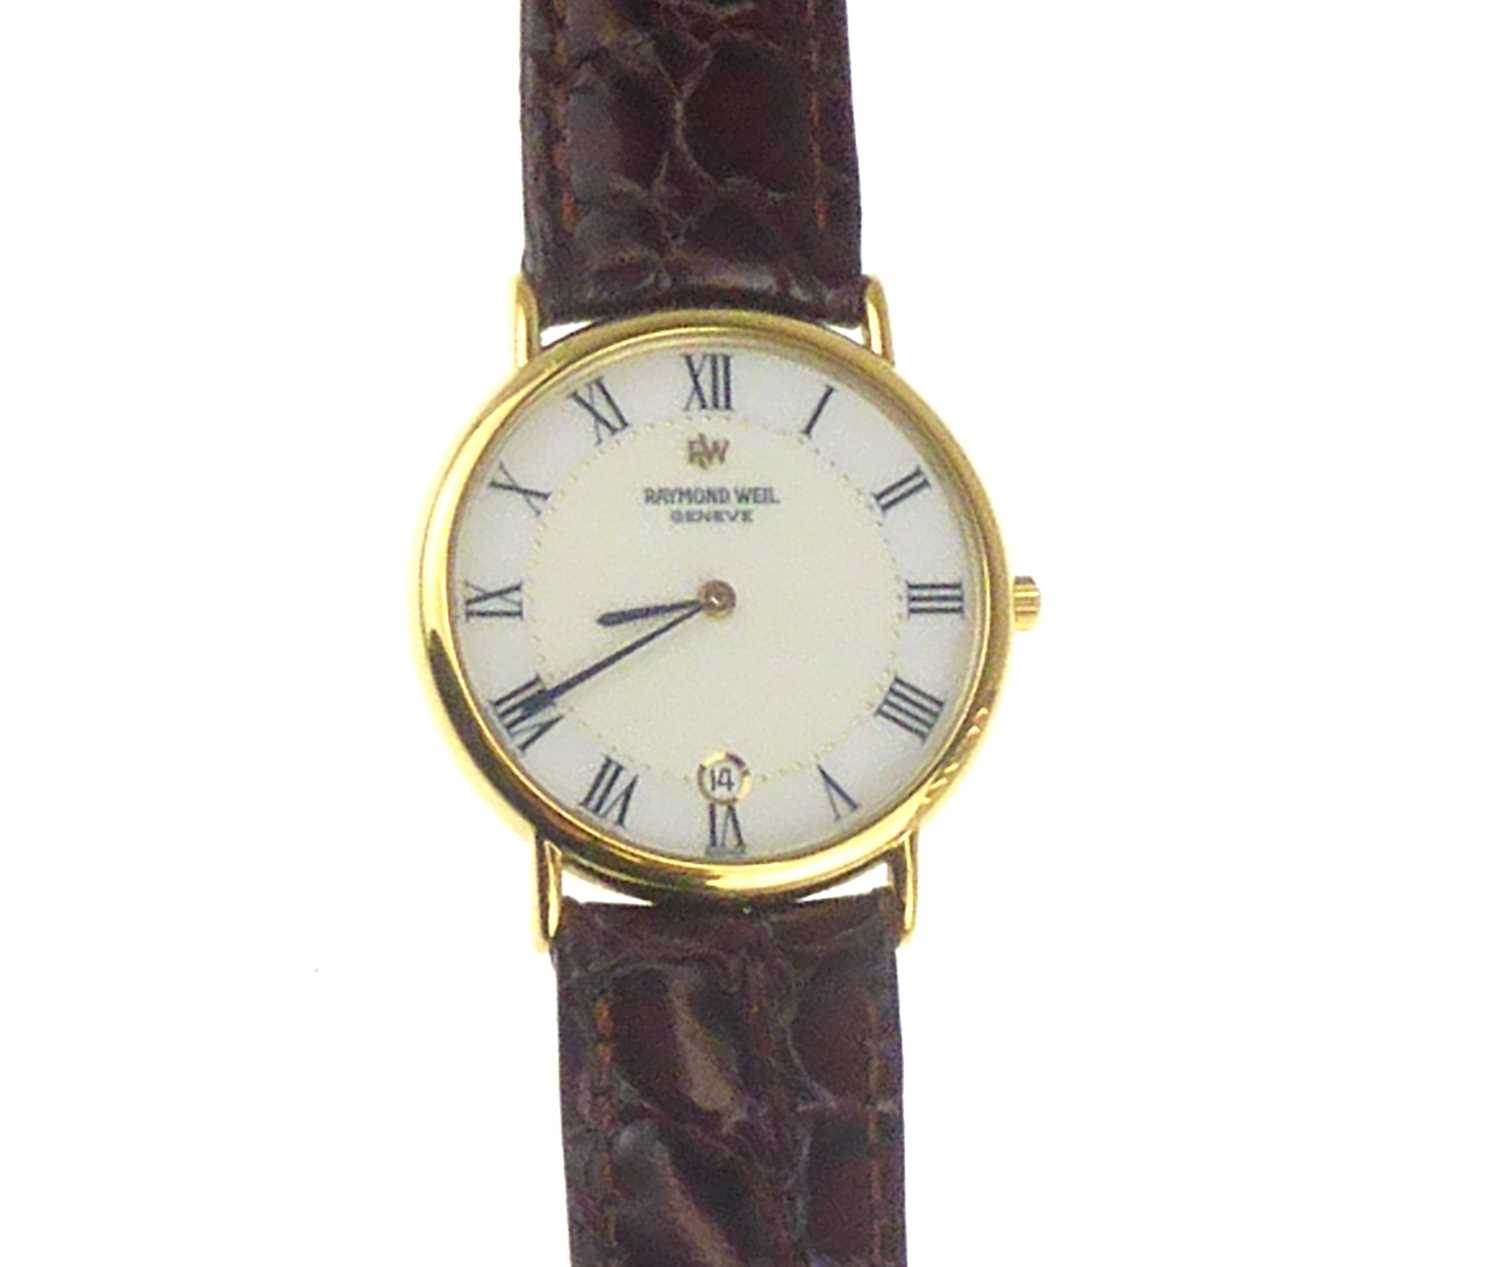 RAYMOND WEIL; a gentlemen's Genève wristwatch, the white enamelled dial set with Roman numerals